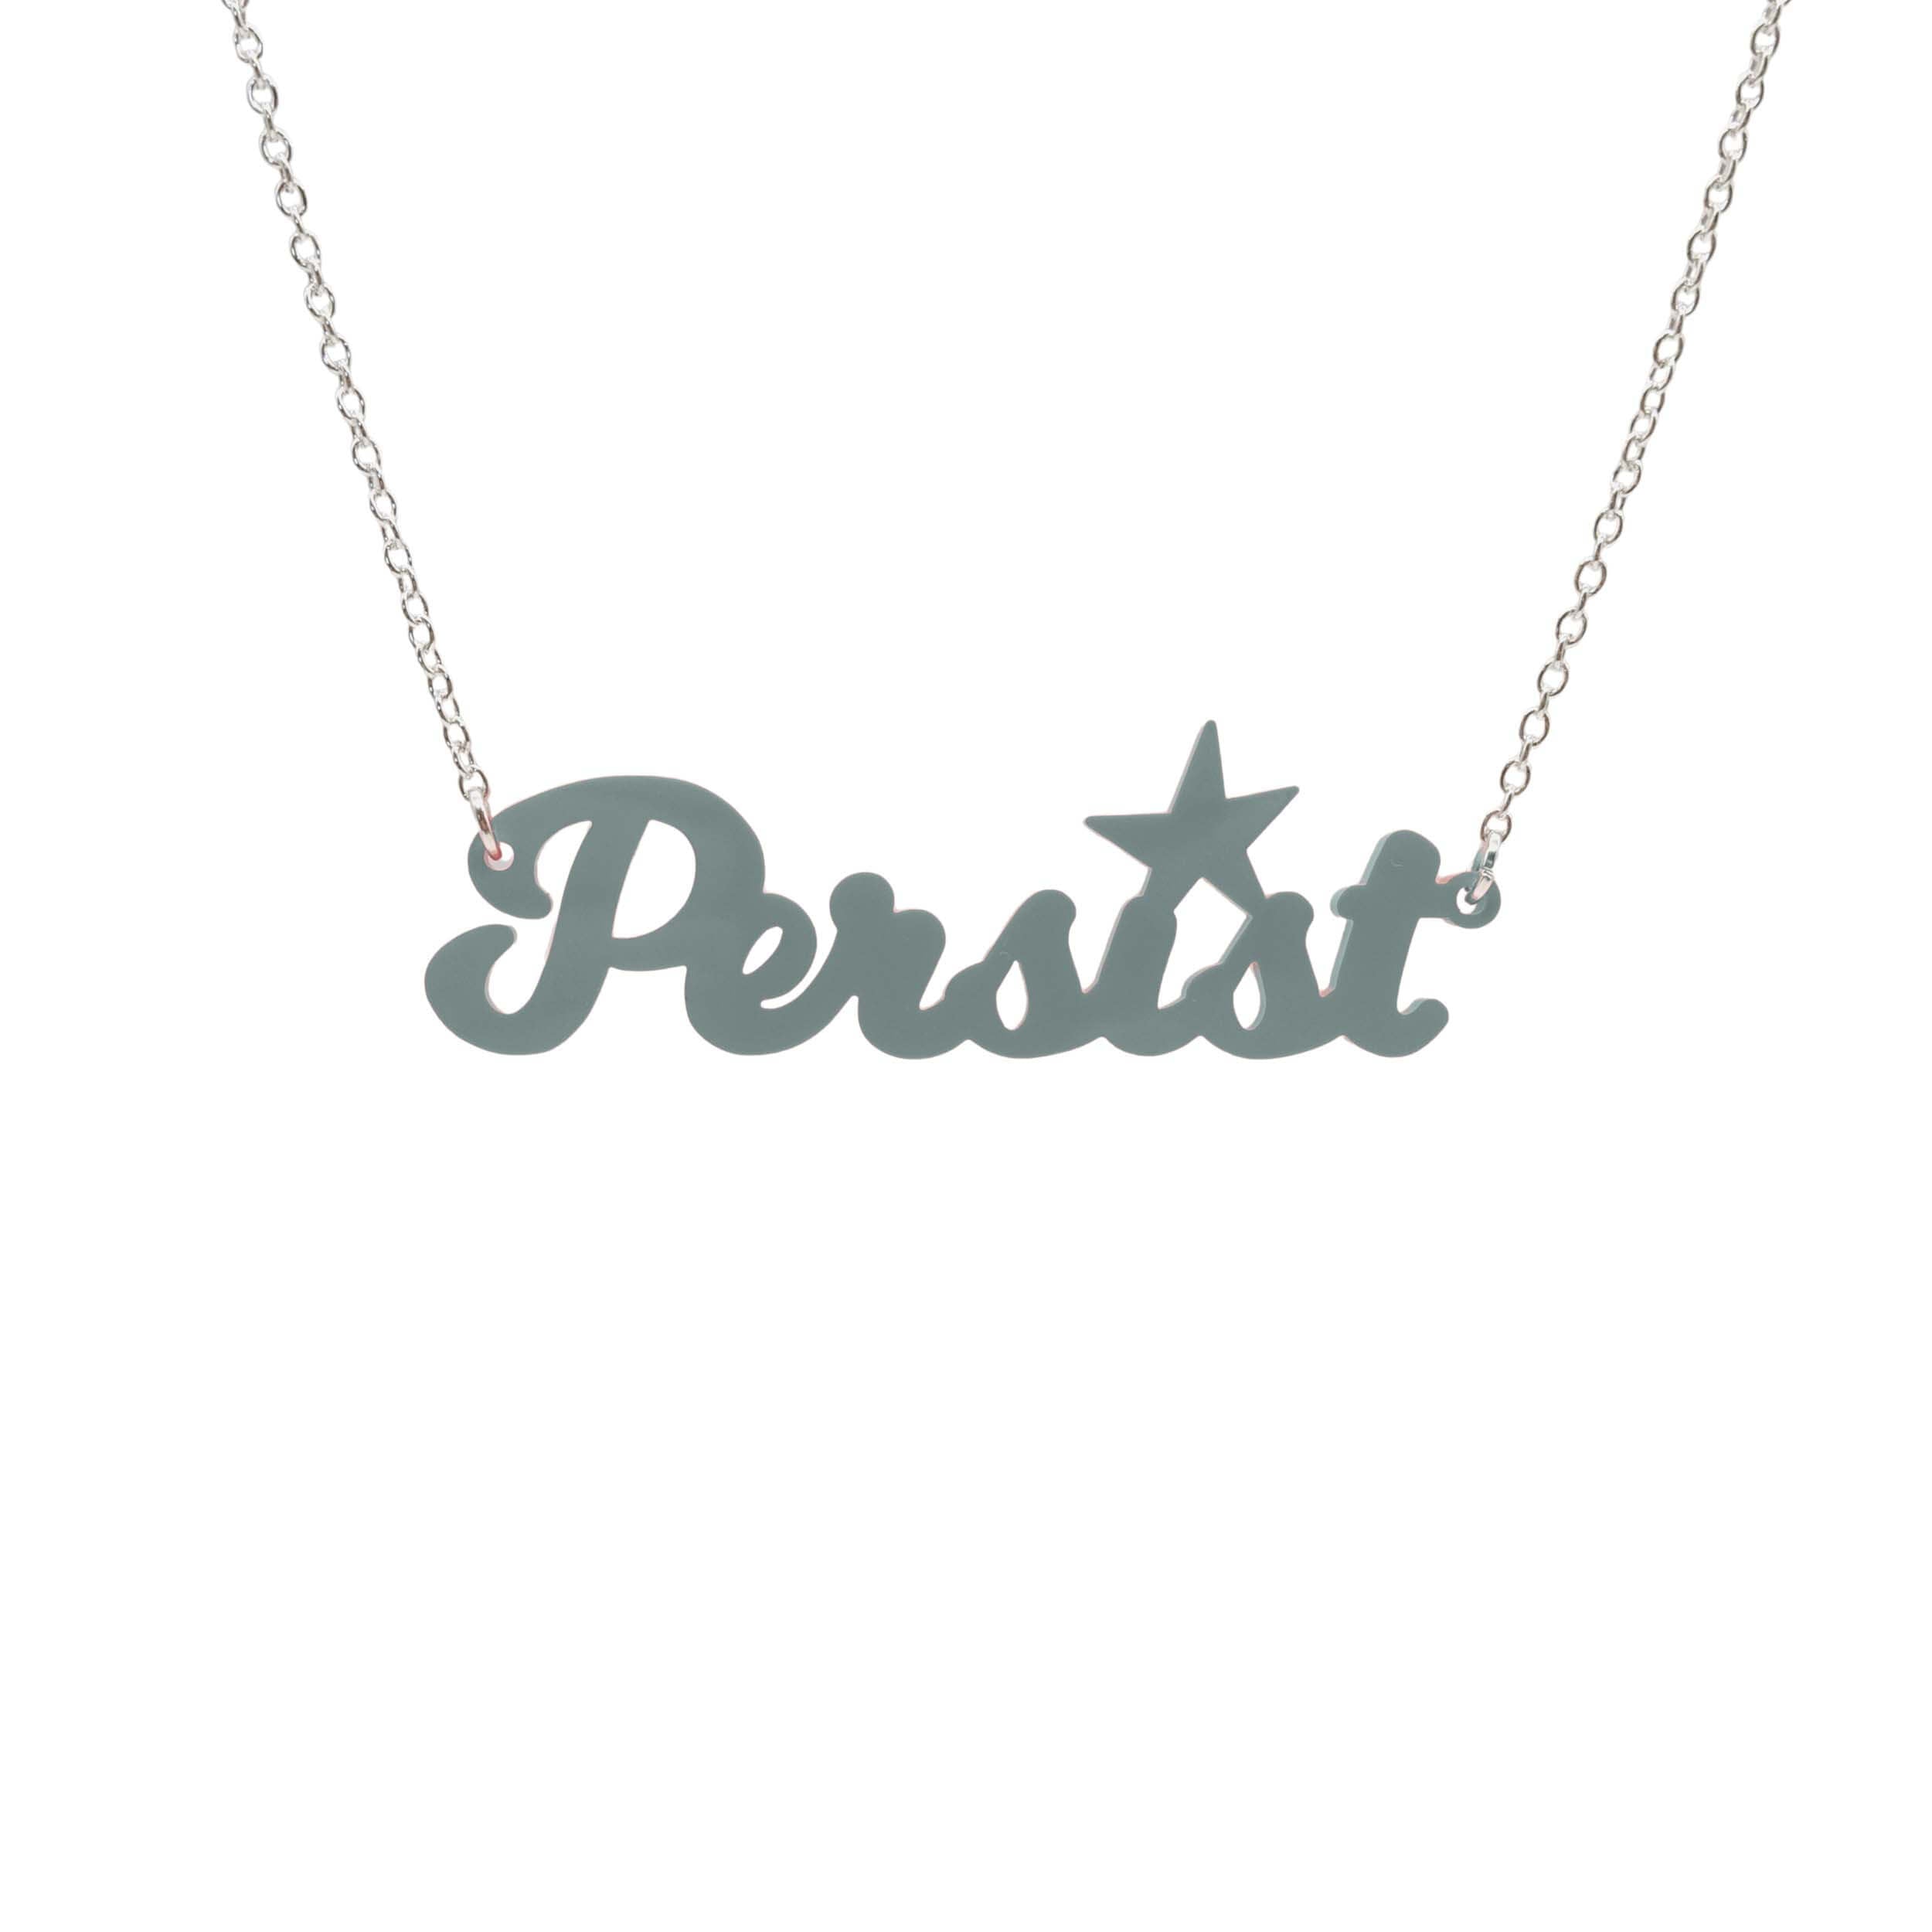 Persist necklace in script font in duck egg green, shown hanging on a white background. Join the Persisterhood! 